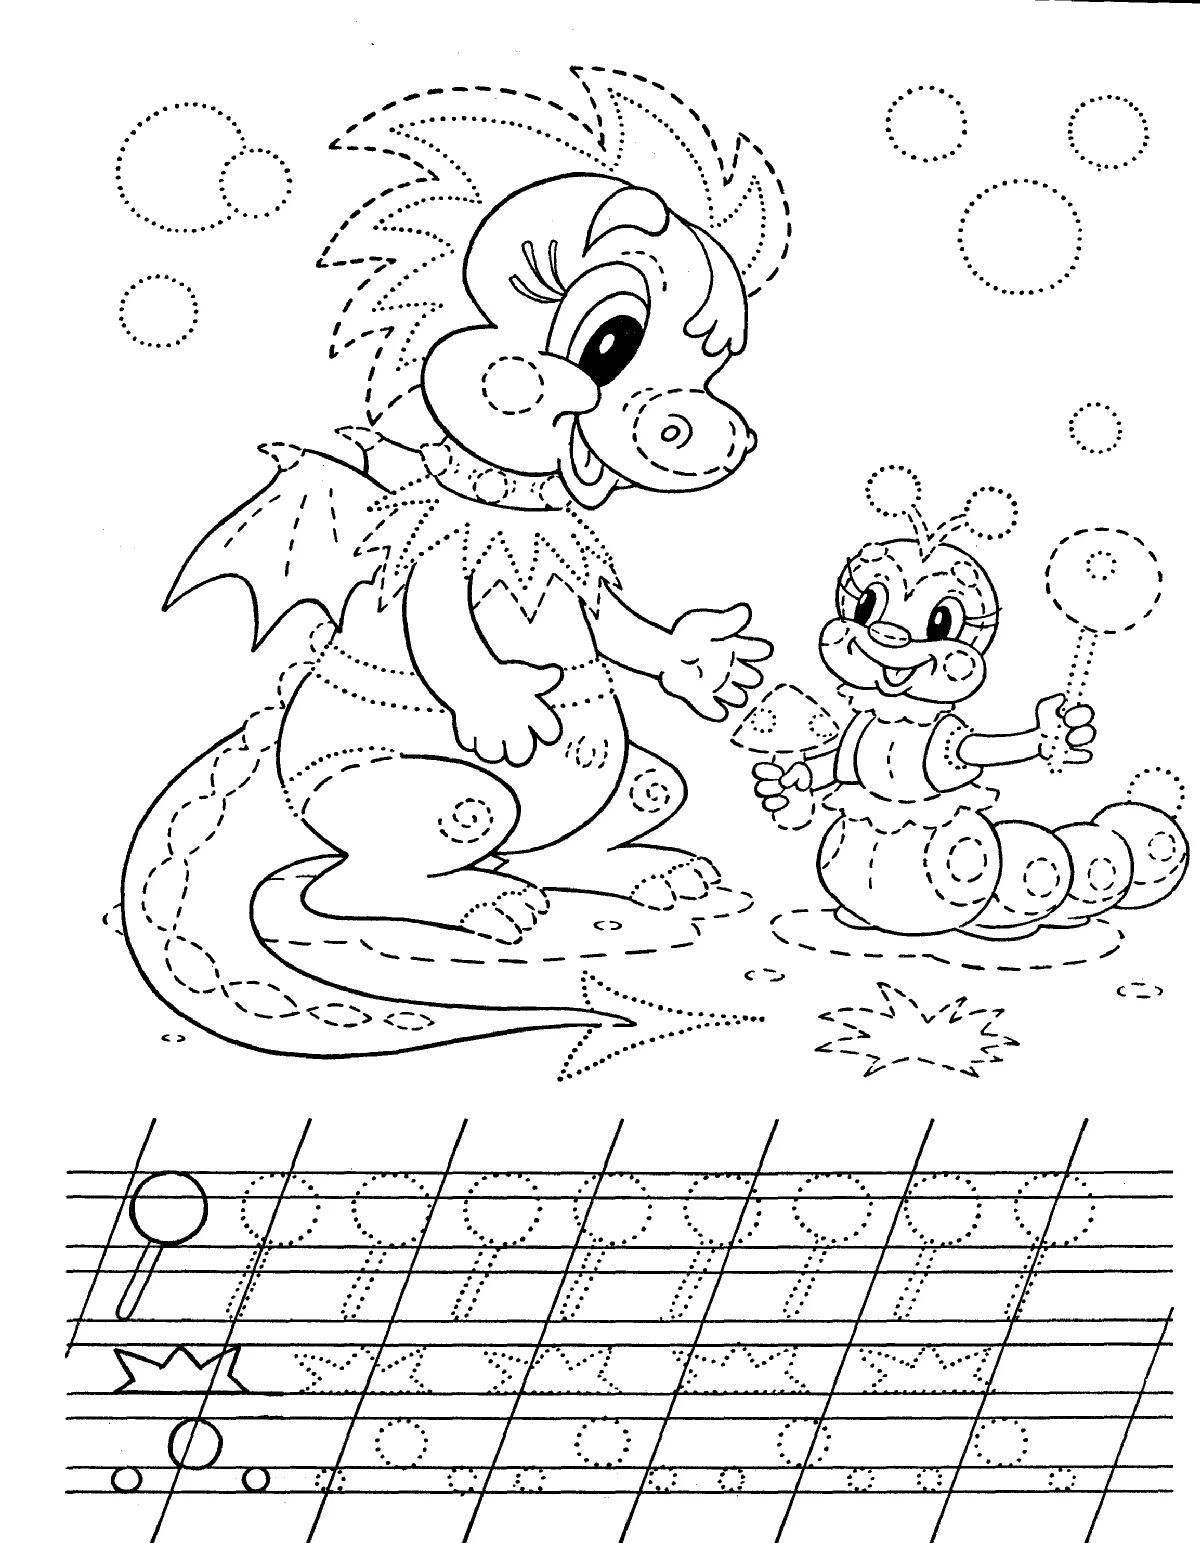 Fun coloring book recipe for 4-5 year olds